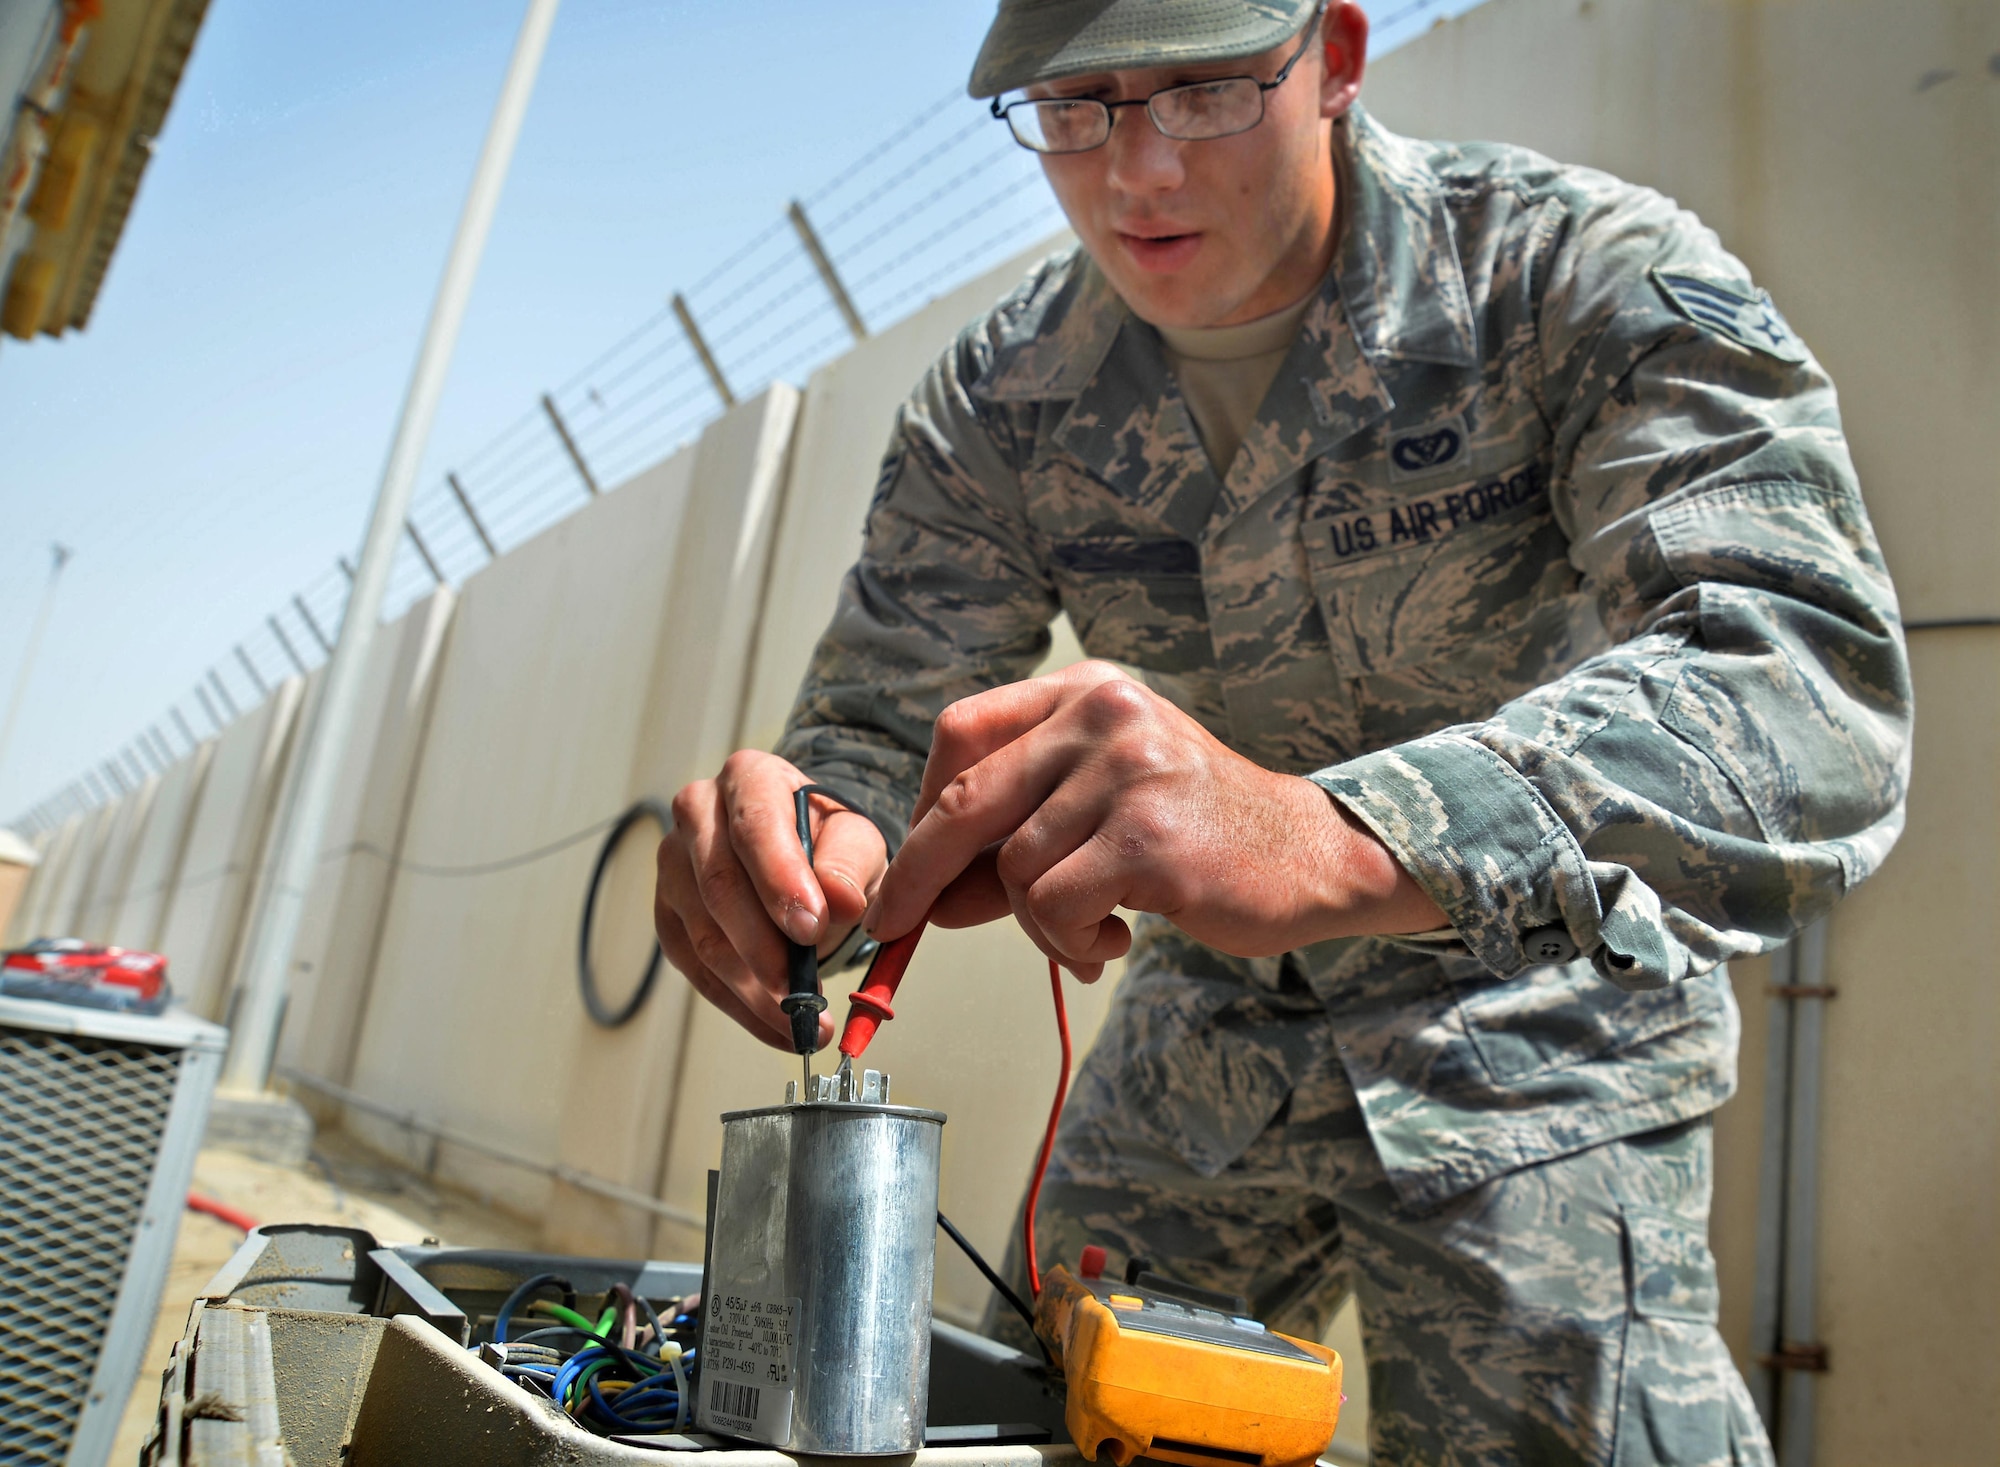 Senior Airman Trent, heating, ventilation and air conditioning journeyman, conducts a diagnostic test on a split AC unit at an undisclosed location in Southwest Asia May 7, 2015. HVAC Airmen are responsible for installing, operating, maintaining, and repairing heating, ventilation, air conditioning and refrigeration systems, combustion equipment, and industrial air compressors. (U.S. Air Force photo/Tech. Sgt. Jeff Andrejcik)